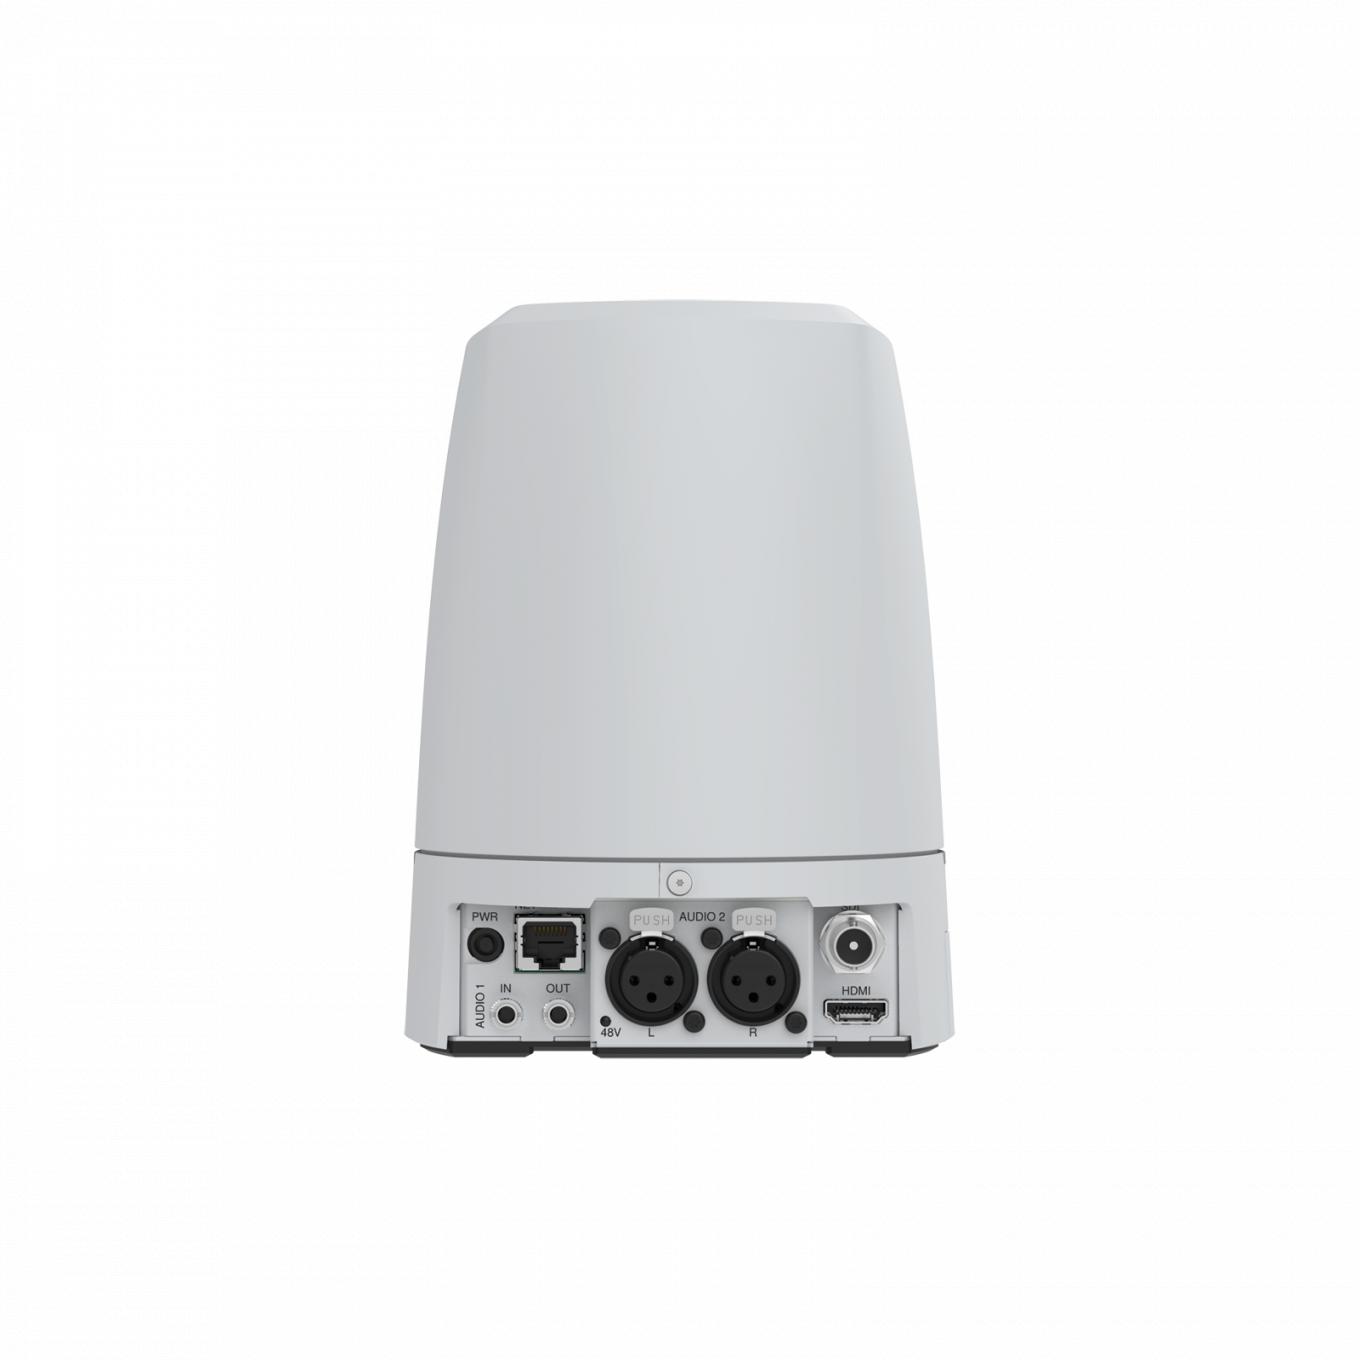 AXIS V5938 PTZ Network Camera | Axis Communications